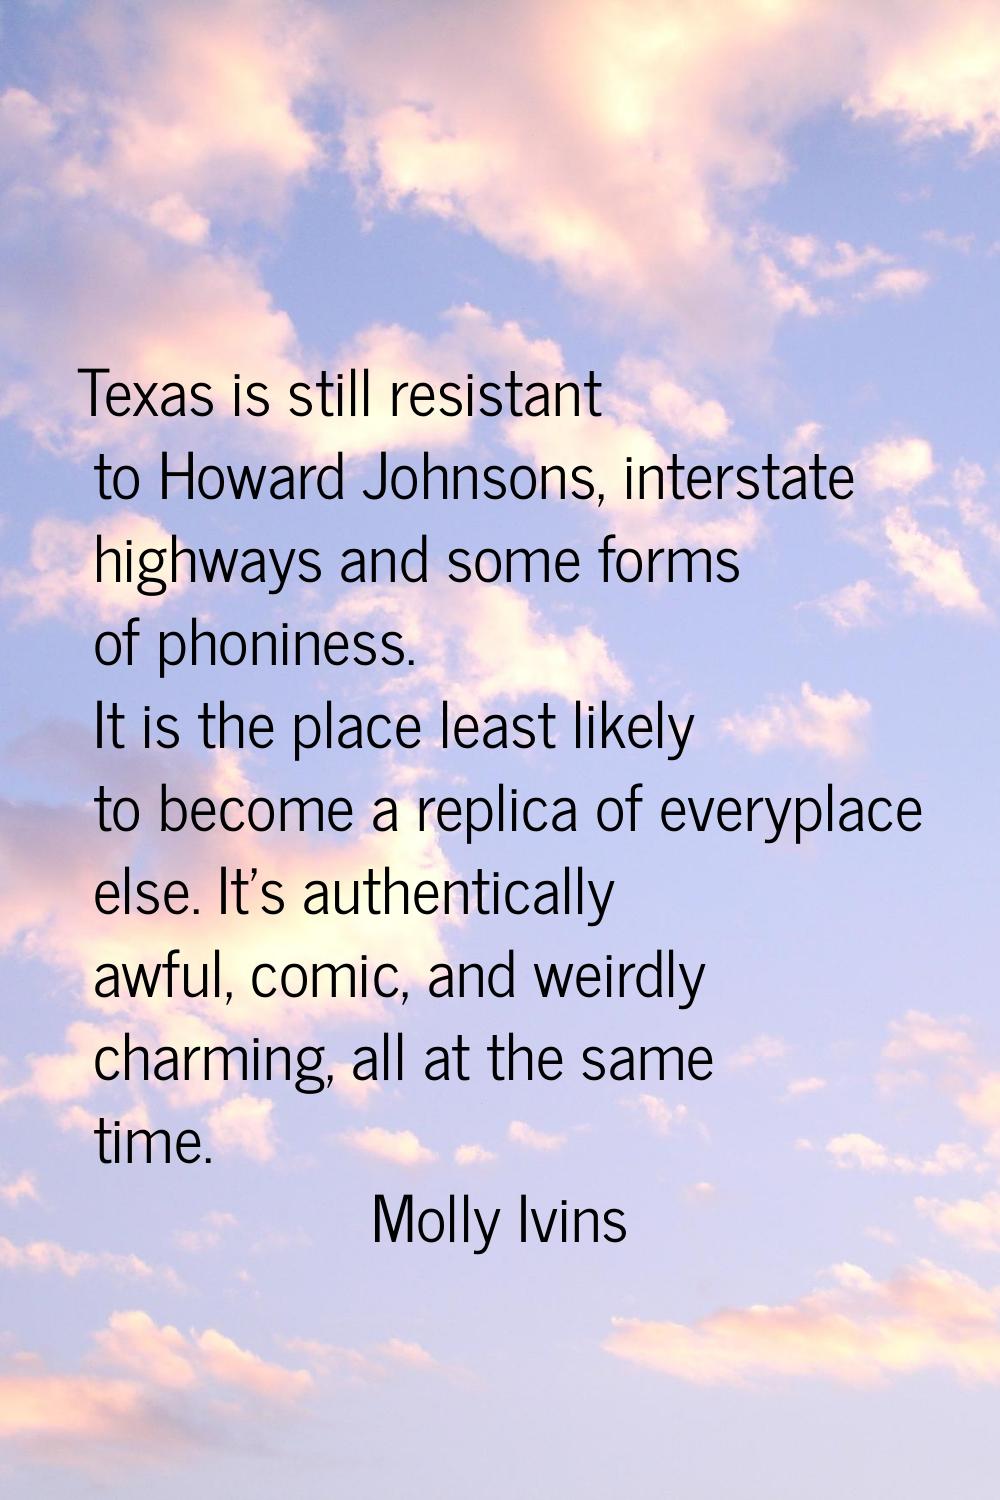 Texas is still resistant to Howard Johnsons, interstate highways and some forms of phoniness. It is